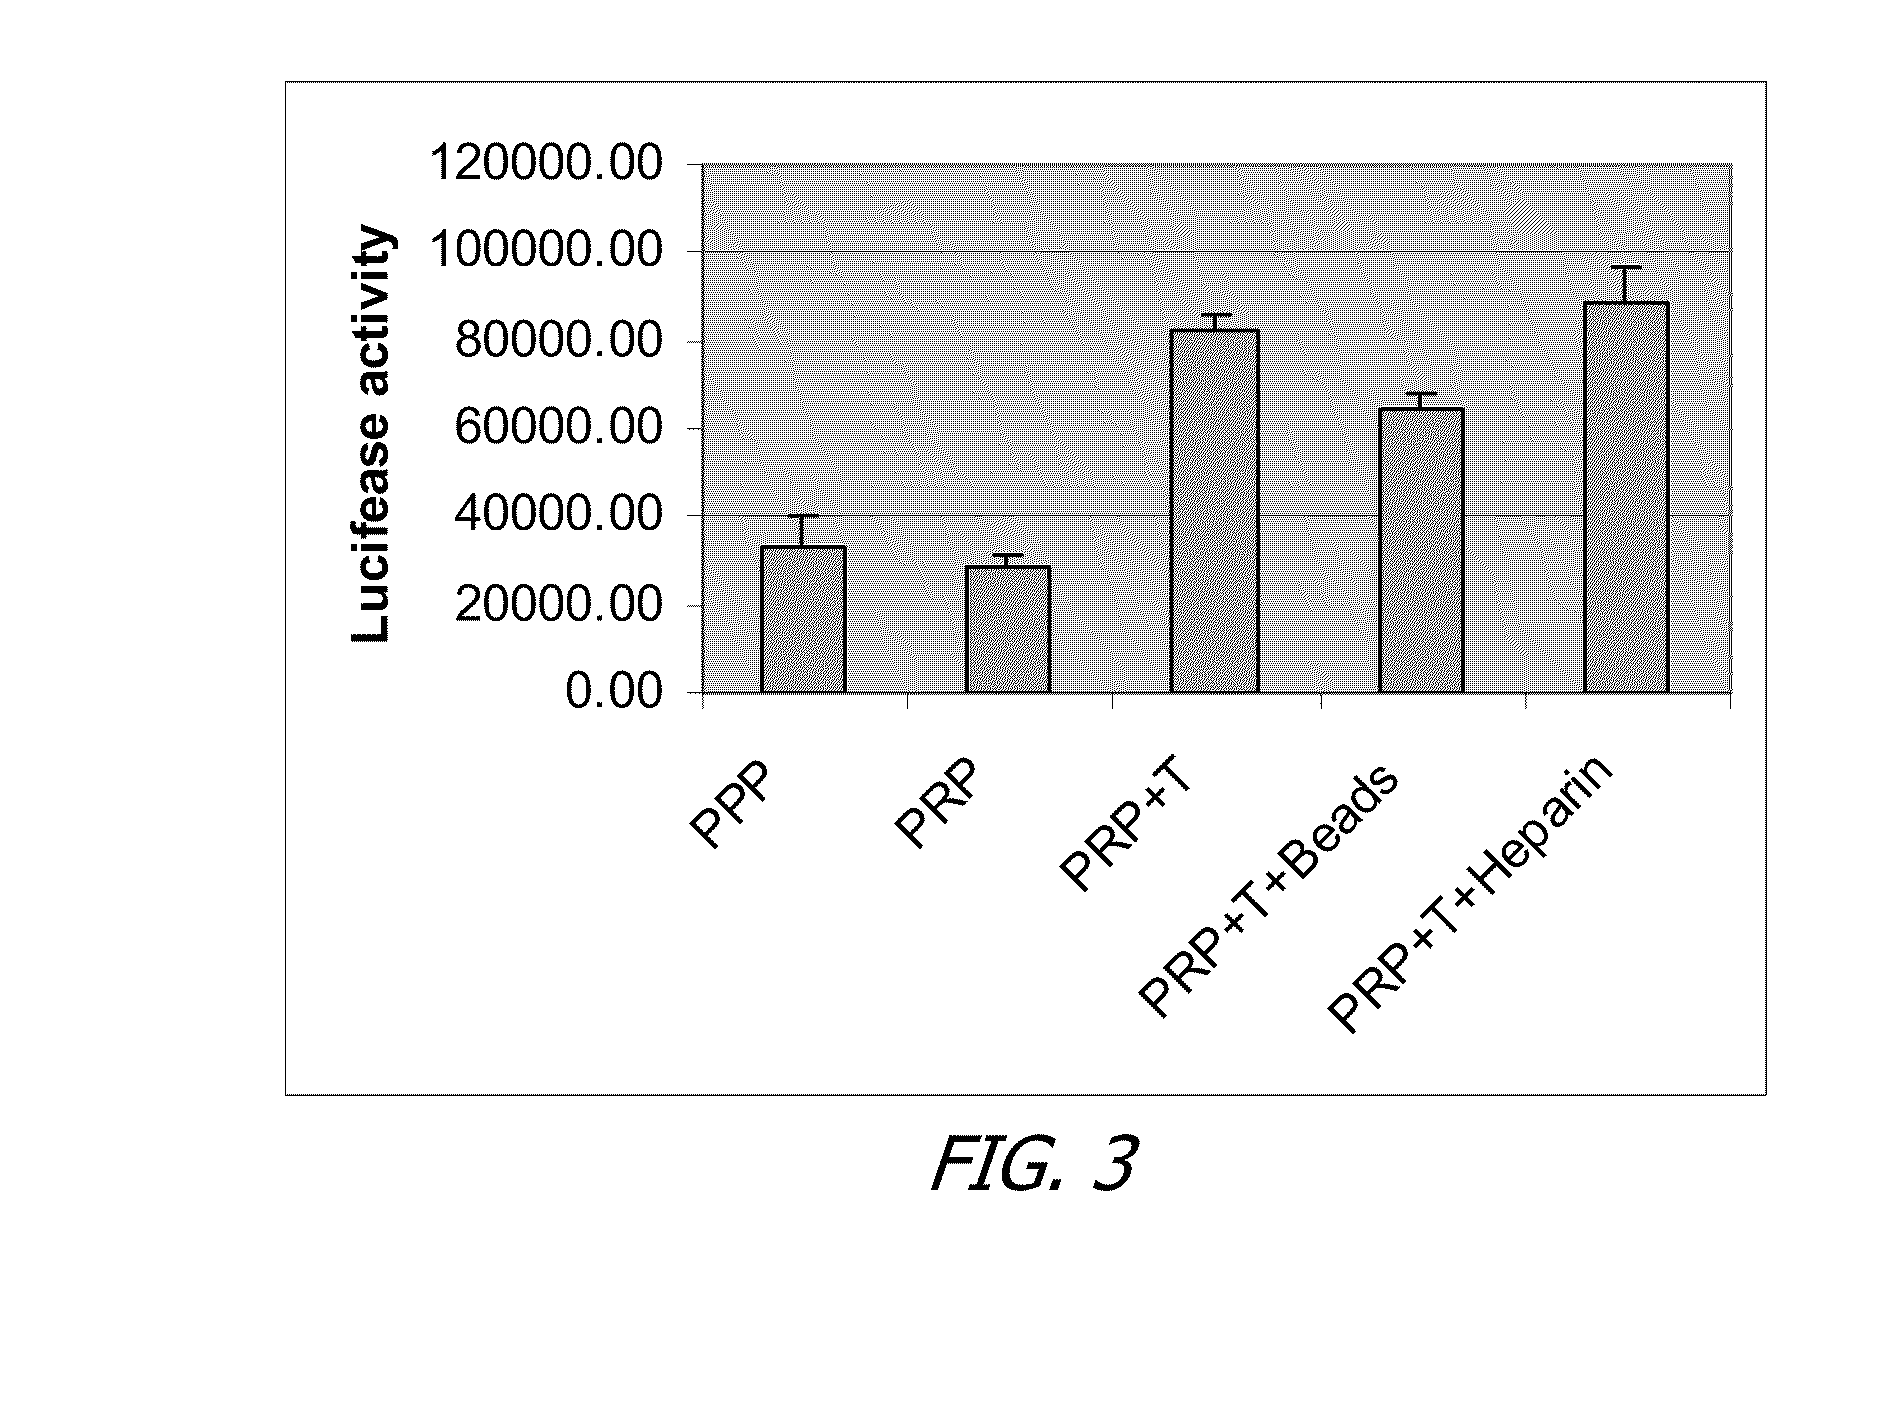 Pf4-depleted platelet containing blood preparations and related kits, devices and methods for hard and soft tissue repair